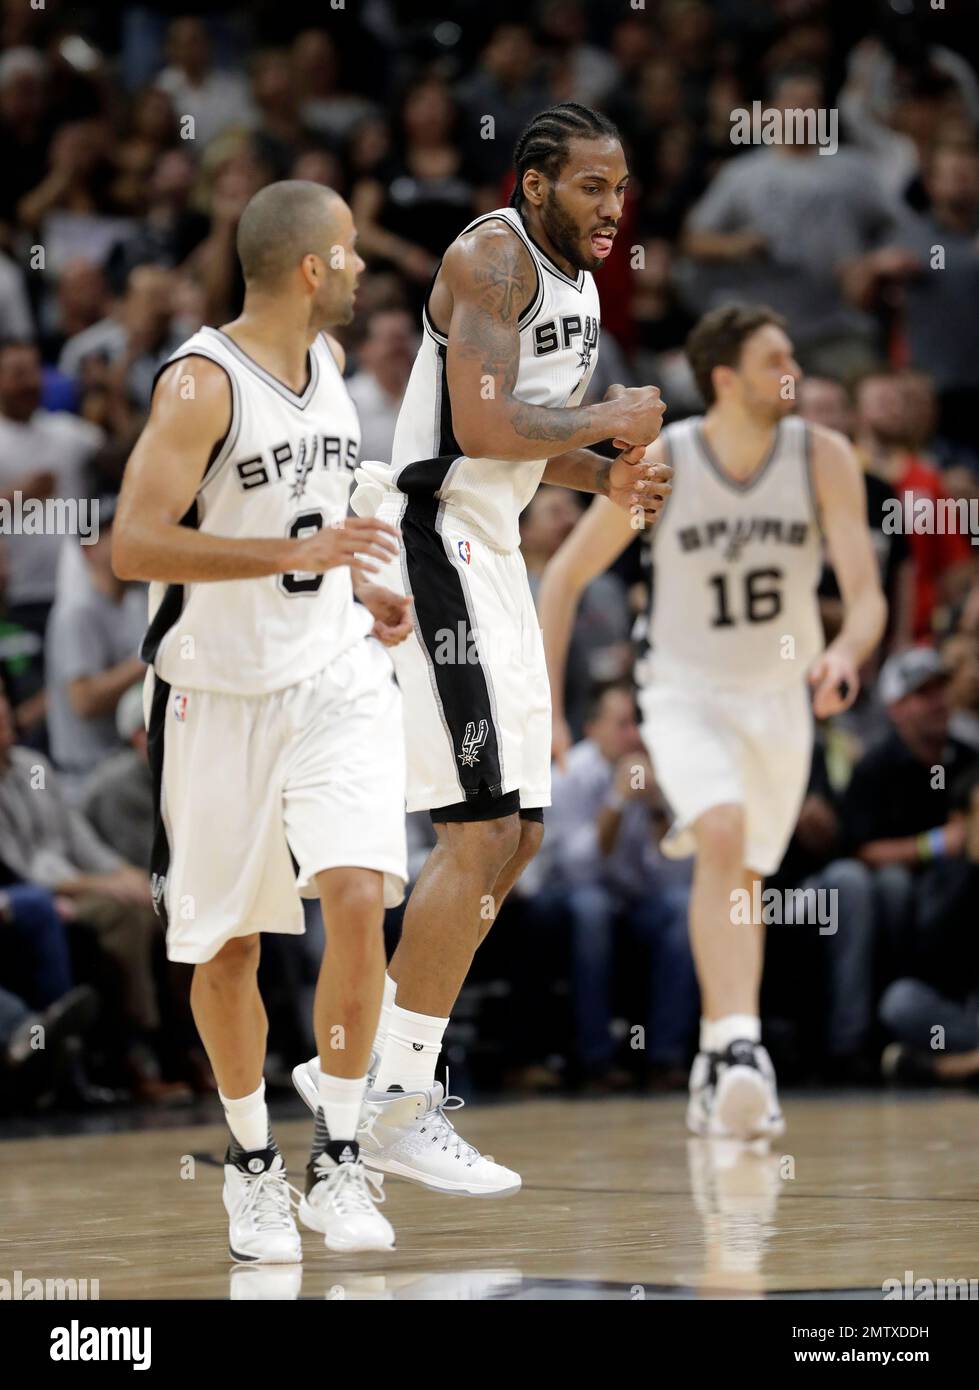 San Antonio Spurs' Kawhi Leonard, center, celebrates a basket as Tony  Parker, left, of France and Pau Gasol (16) of Spain move up court during  the first half of Game 2 in